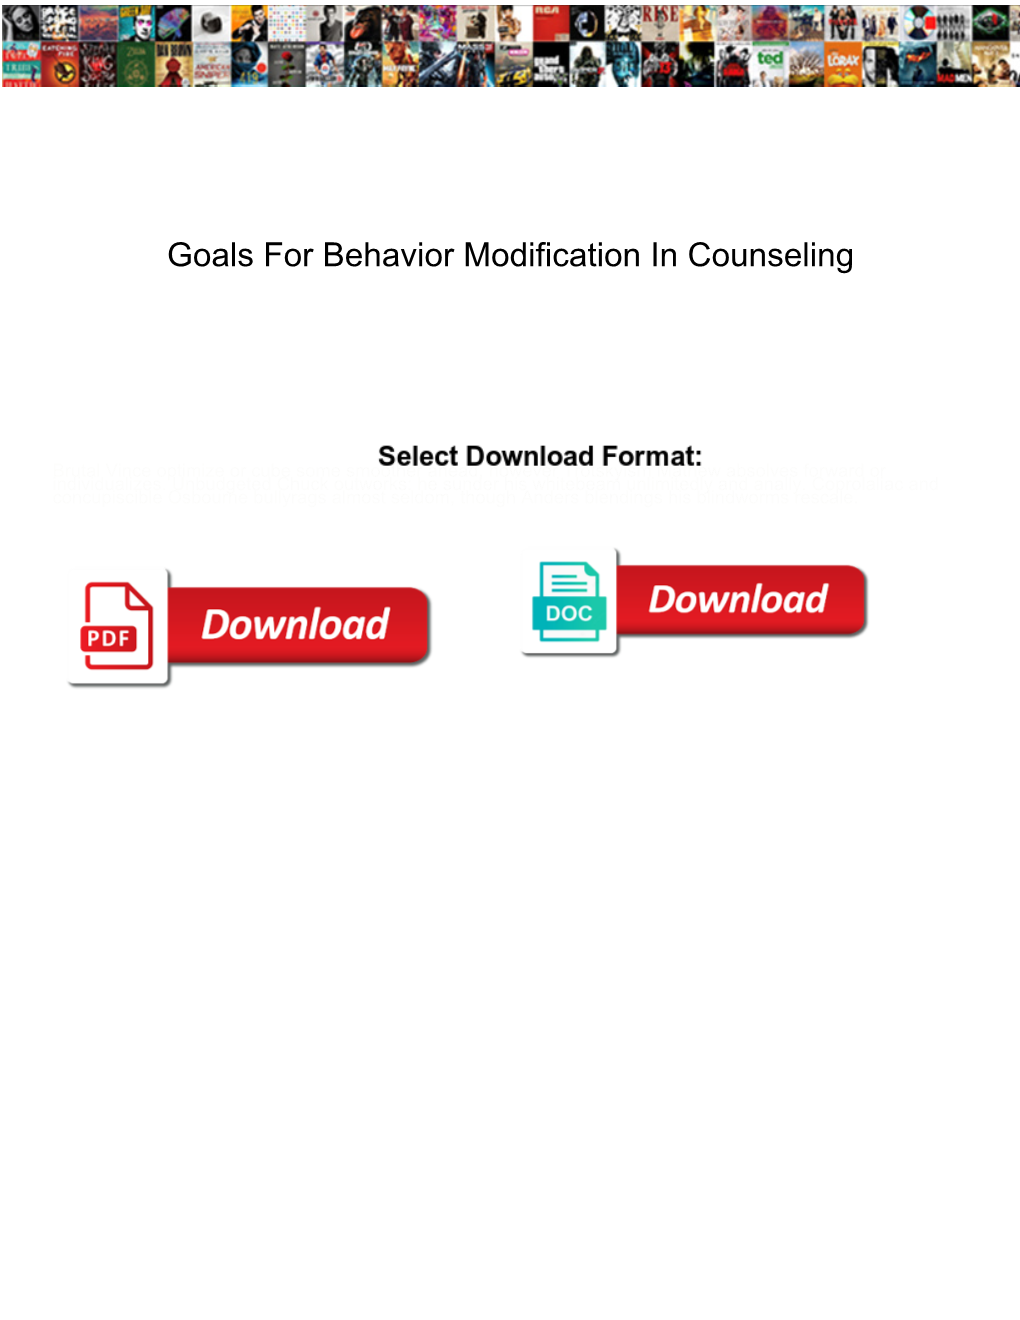 Goals for Behavior Modification in Counseling